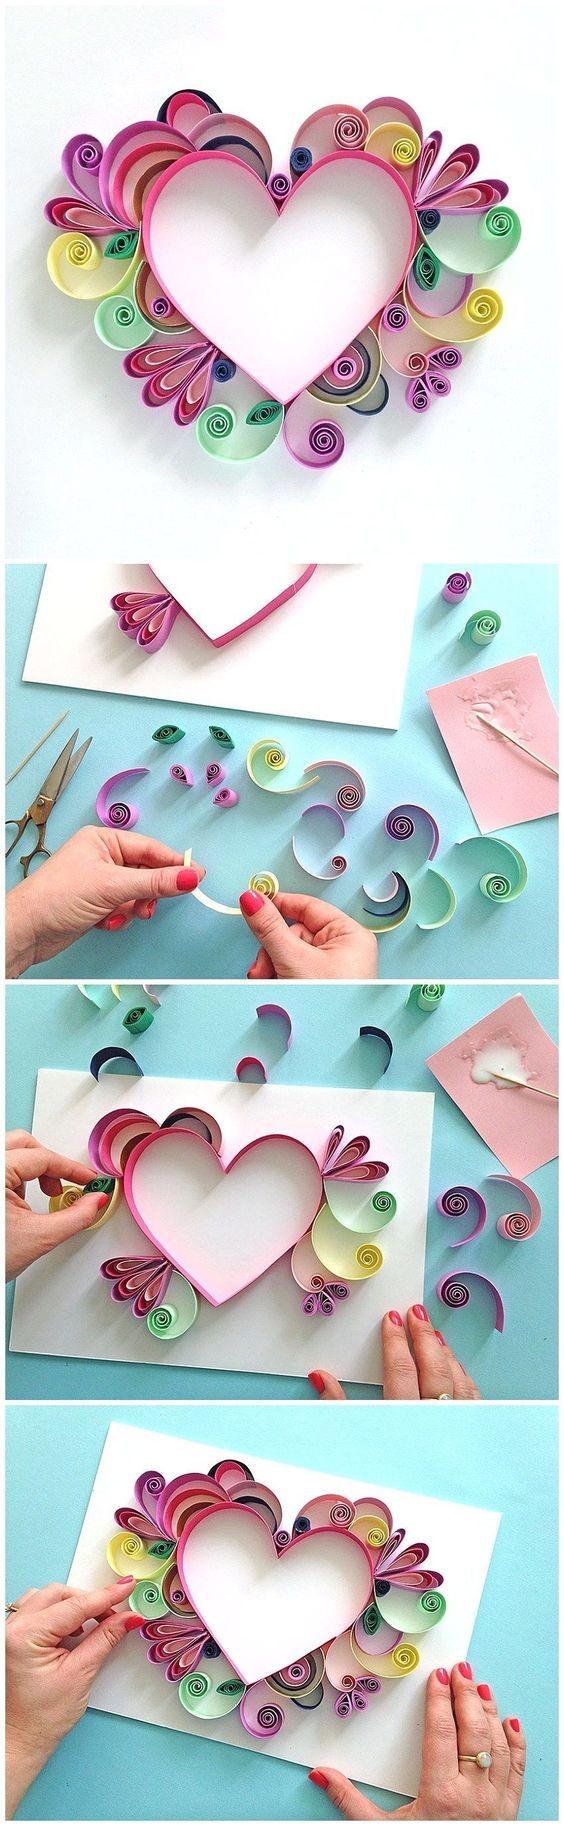 Papercraft Projects Learn How to Quill A Darling Heart Shaped Mother S Day Paper Craft